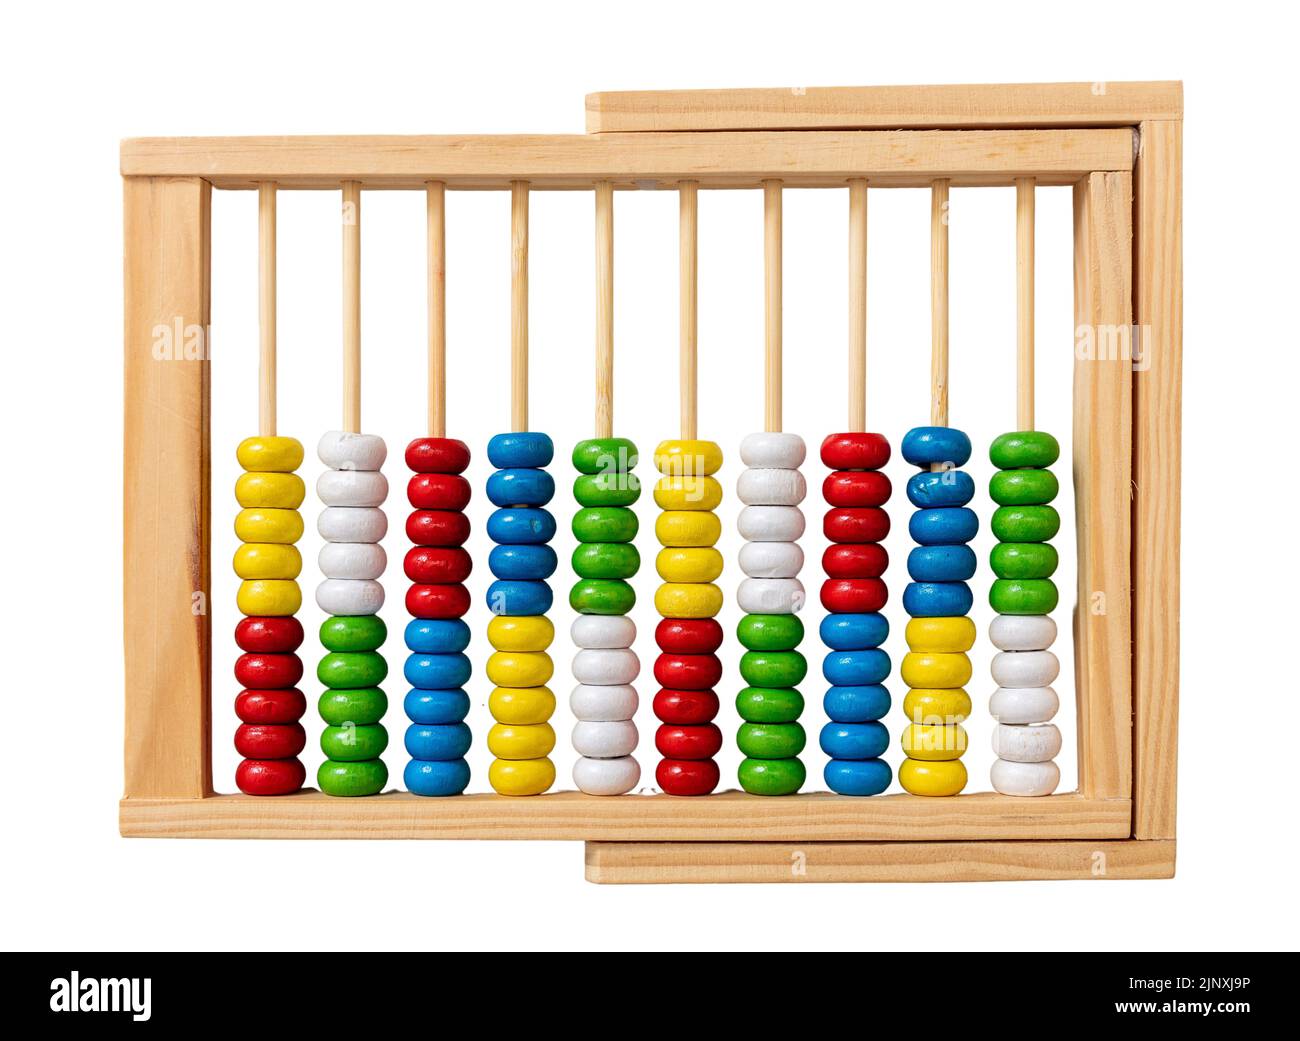 School abacus isolated on white. Colorful beads and wooden frame for kids to learn basic Maths, top view Stock Photo